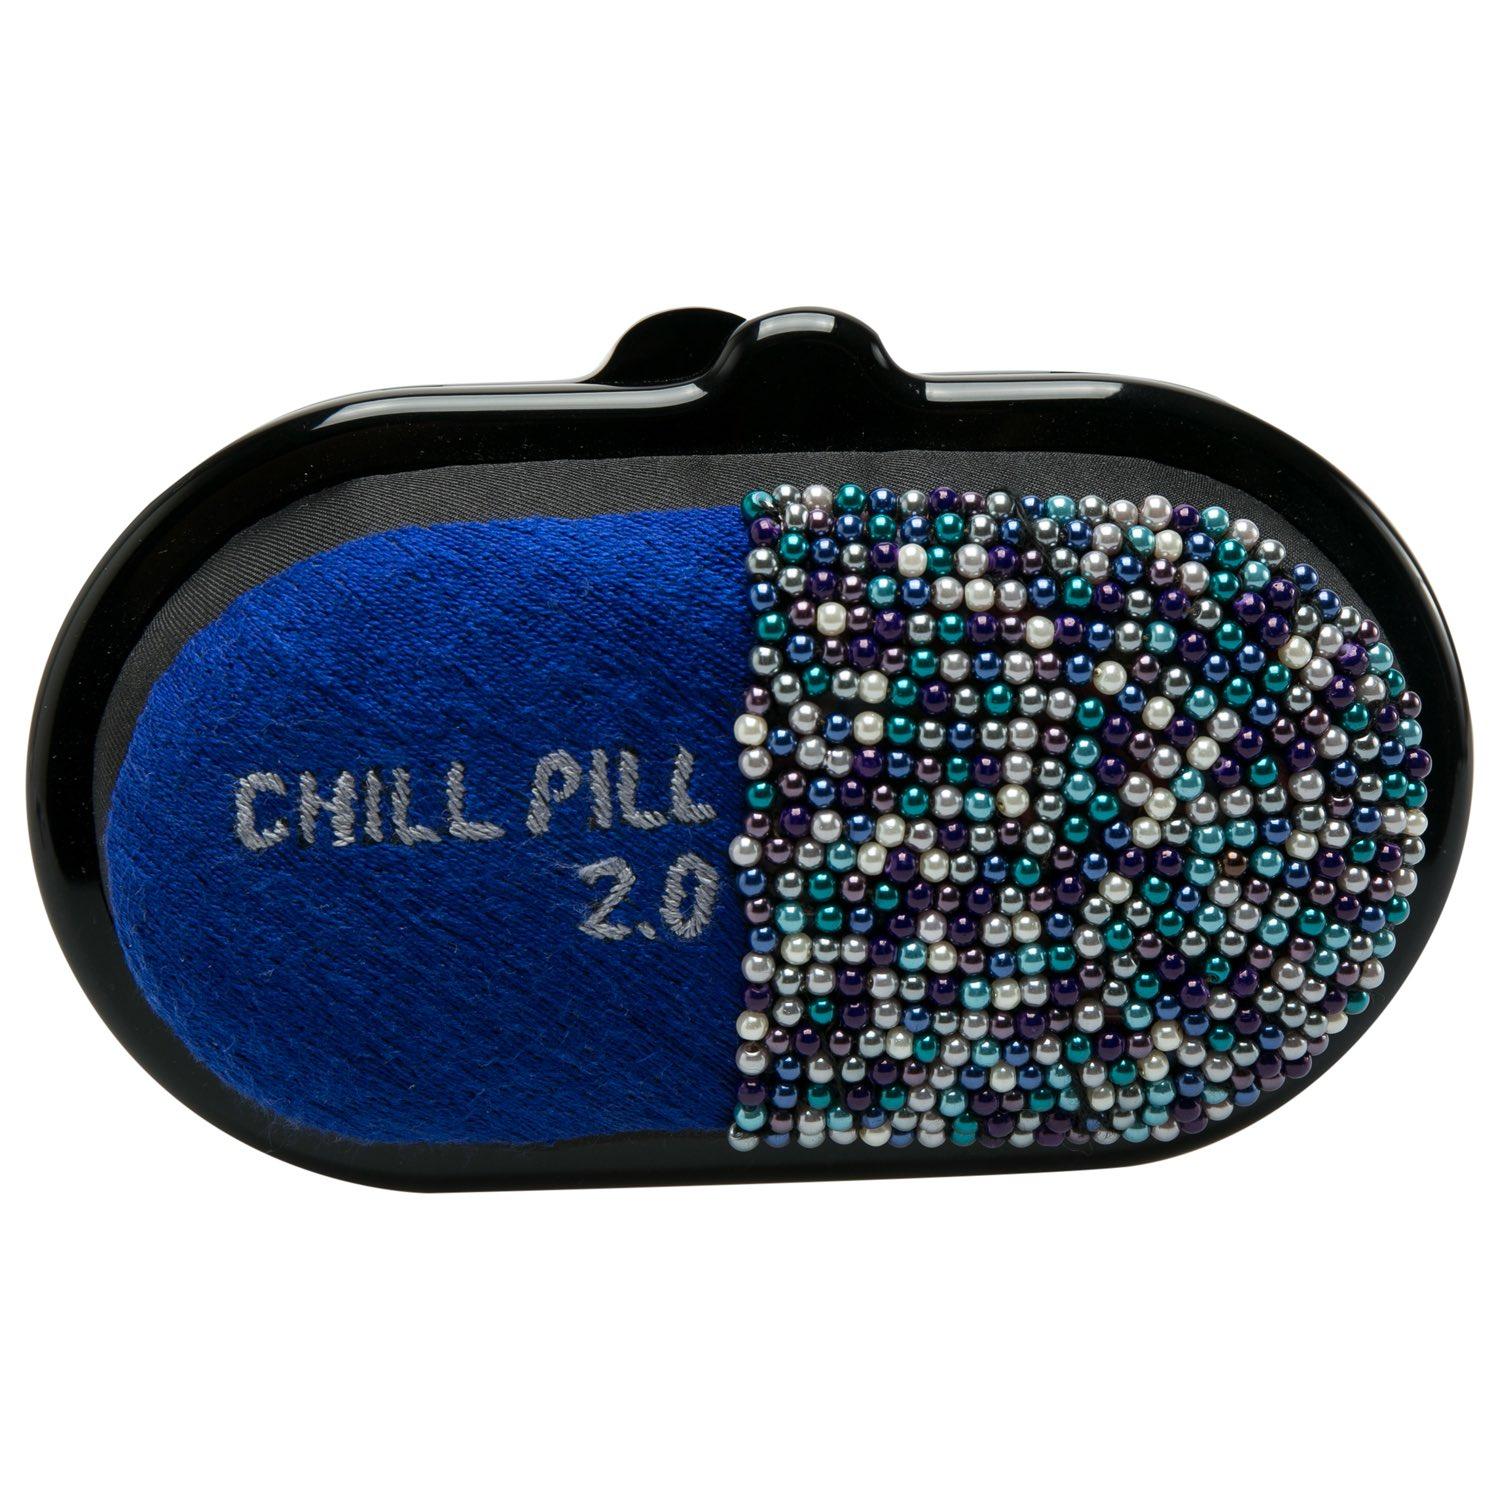 Everybody loves chic accessories that come with an edge. From Sarah's Bag comes this gorgeous clutch that will perfectly complement all your outfits. It has been crafted from blue fabric and multicolored beads and styled with a shoulder strap. The